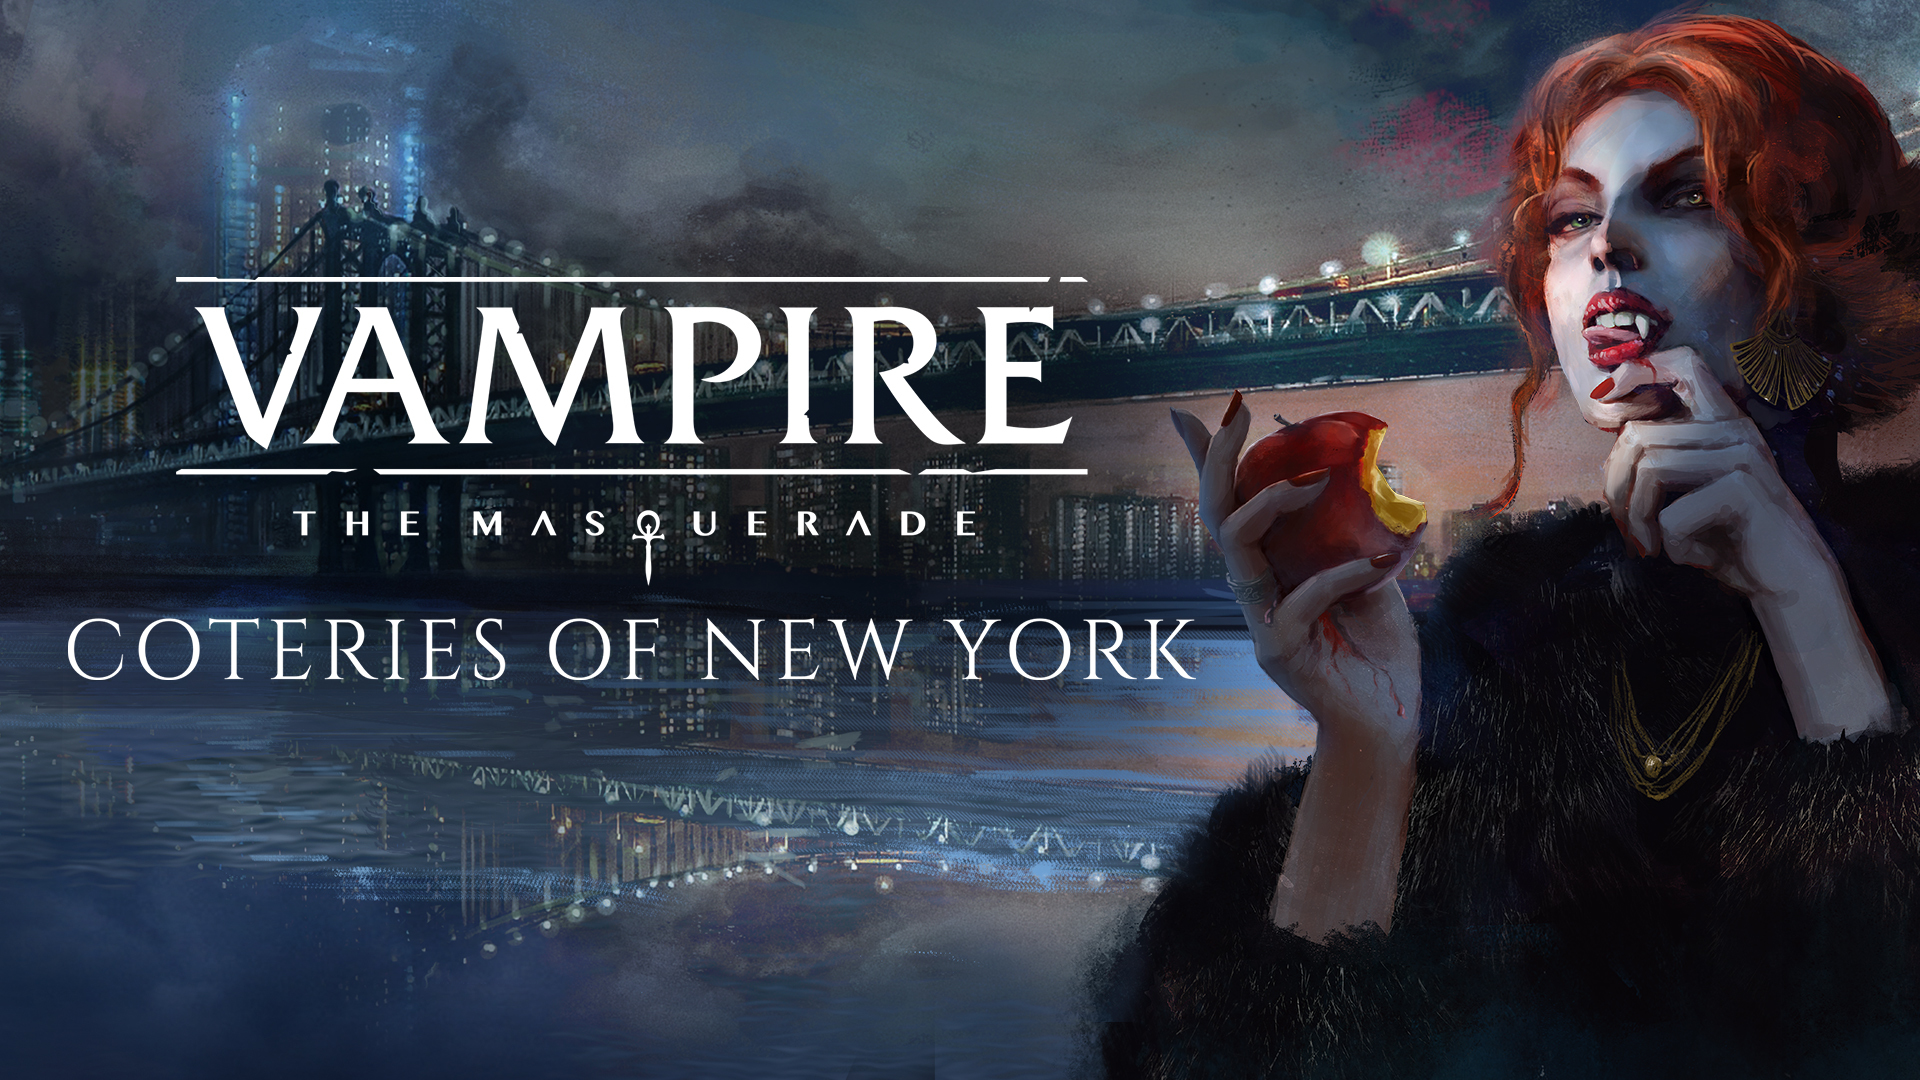 Xathrodox86 reviews: “Vampire: The Masquerade – Coteries of New York” – It  always rains in Nuln